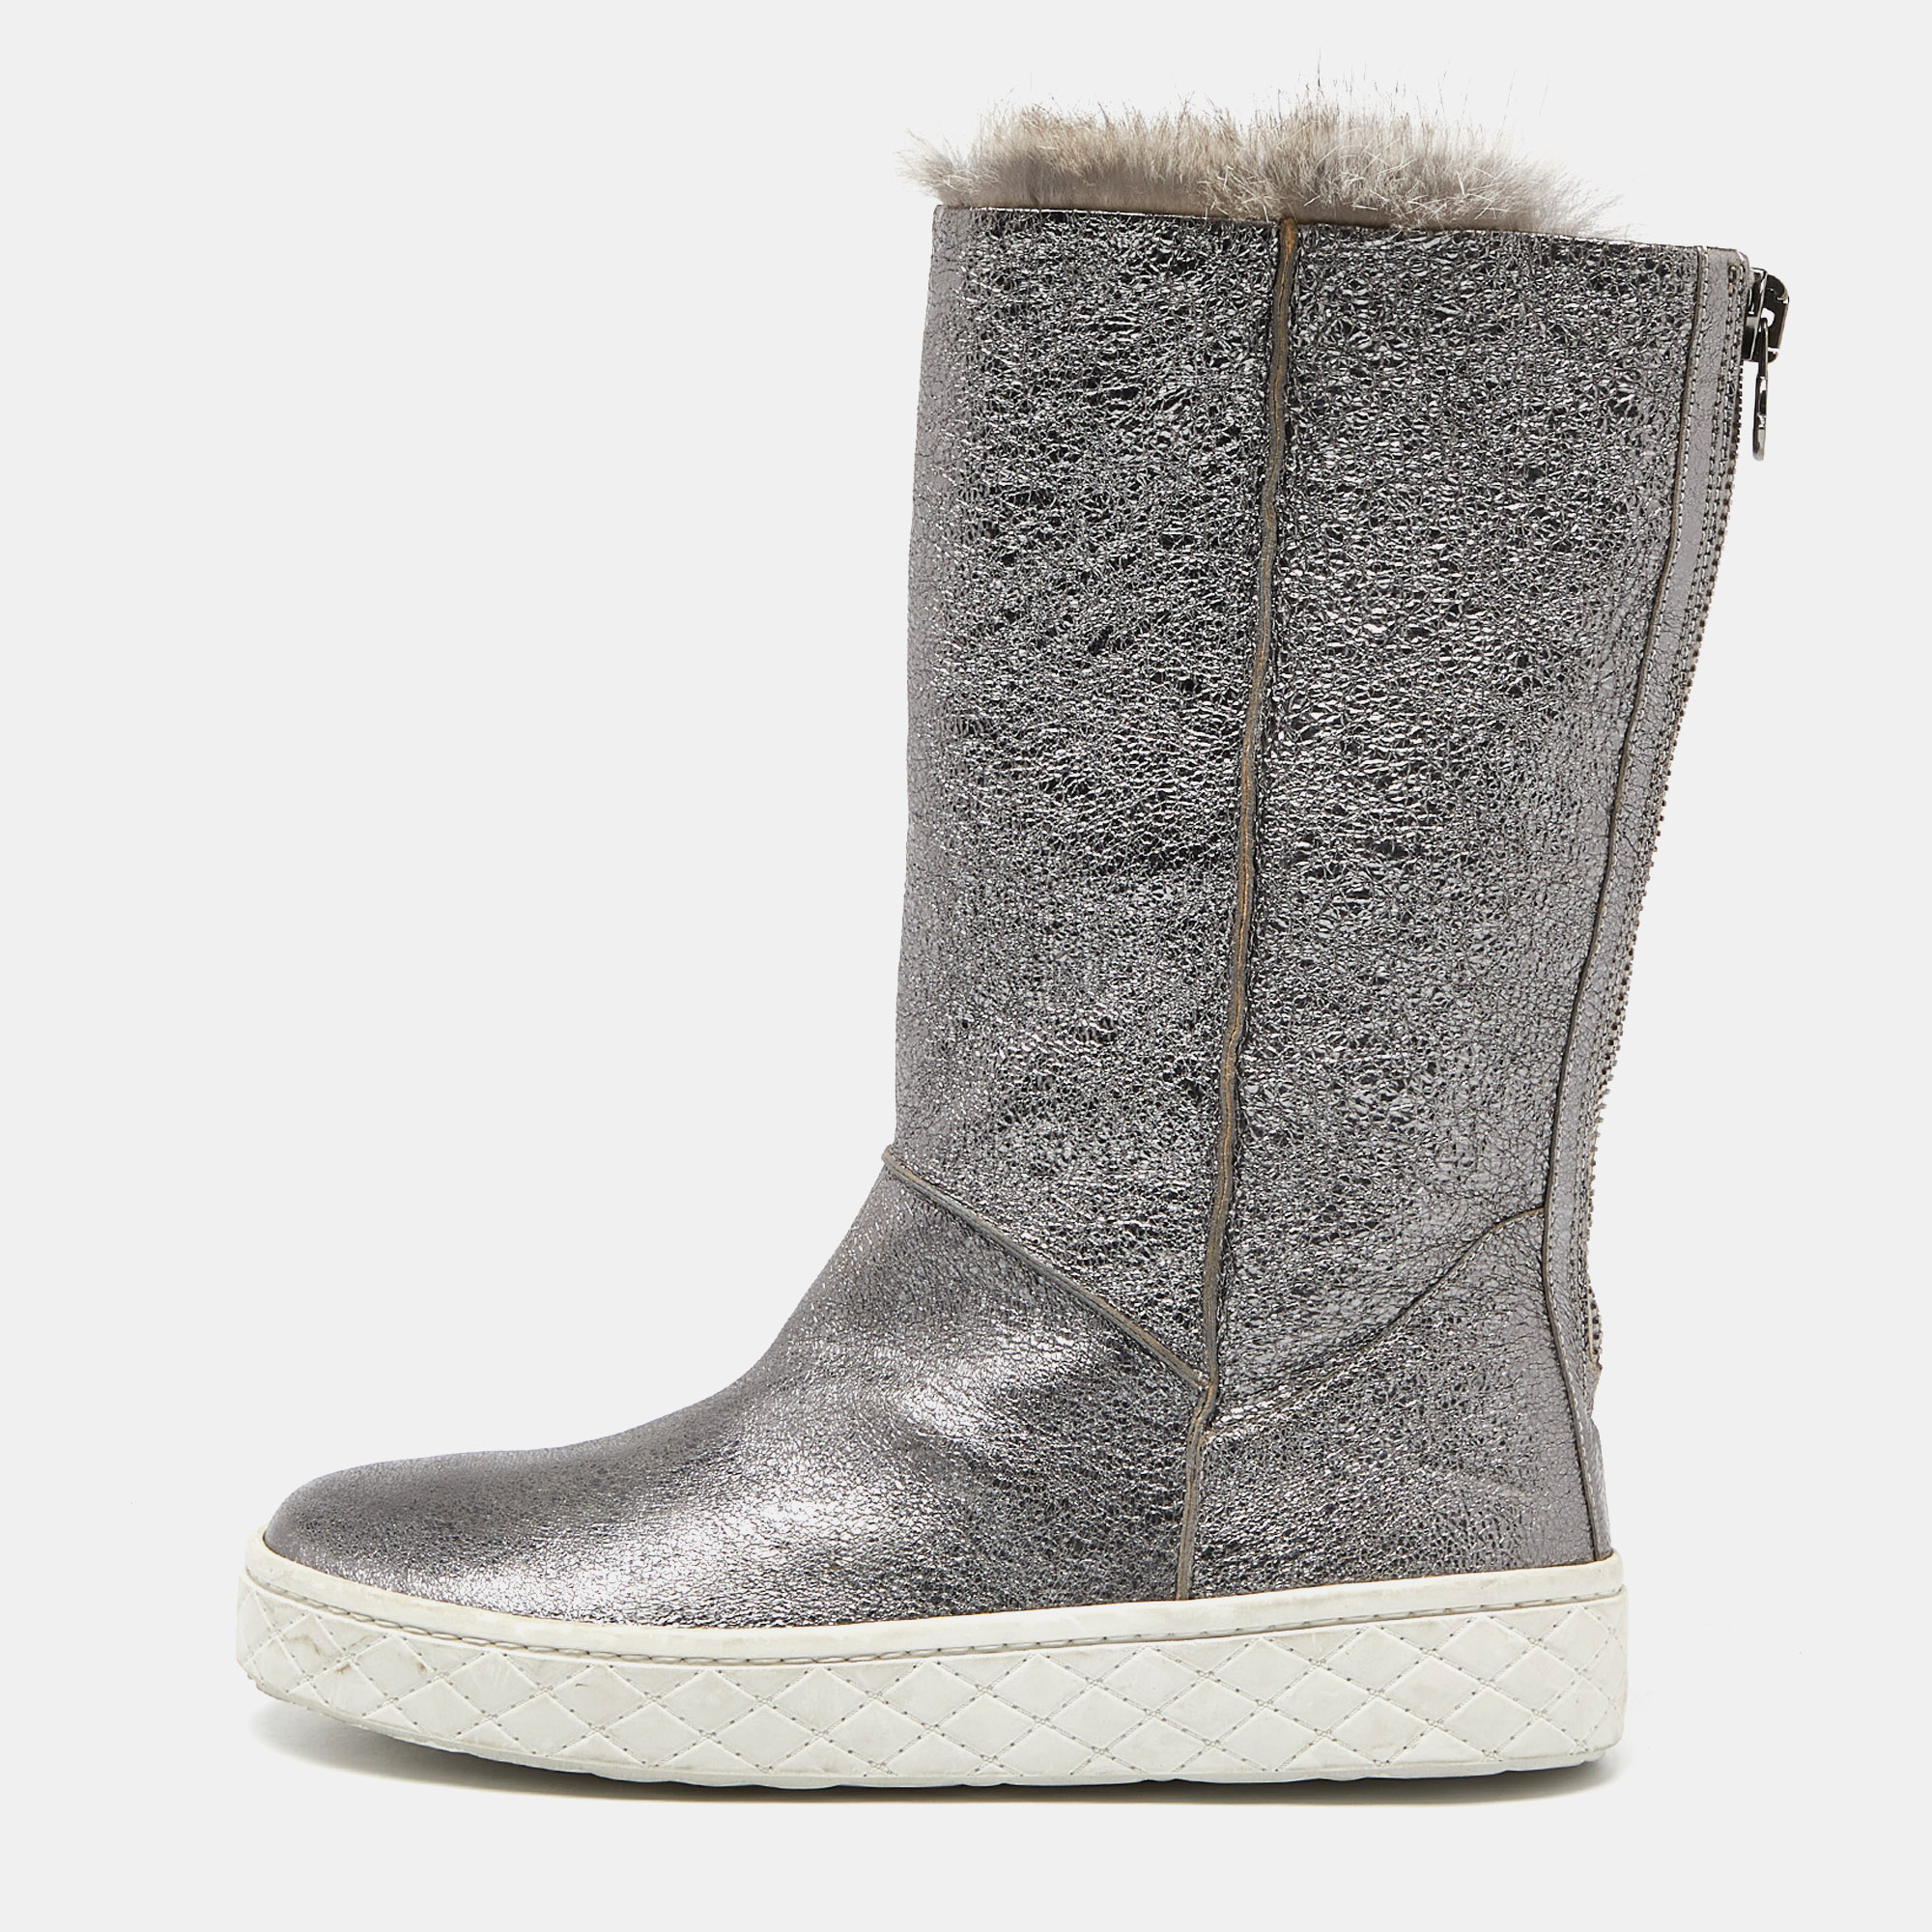 Moncler grey foil leather and fur mid calf boots size 39